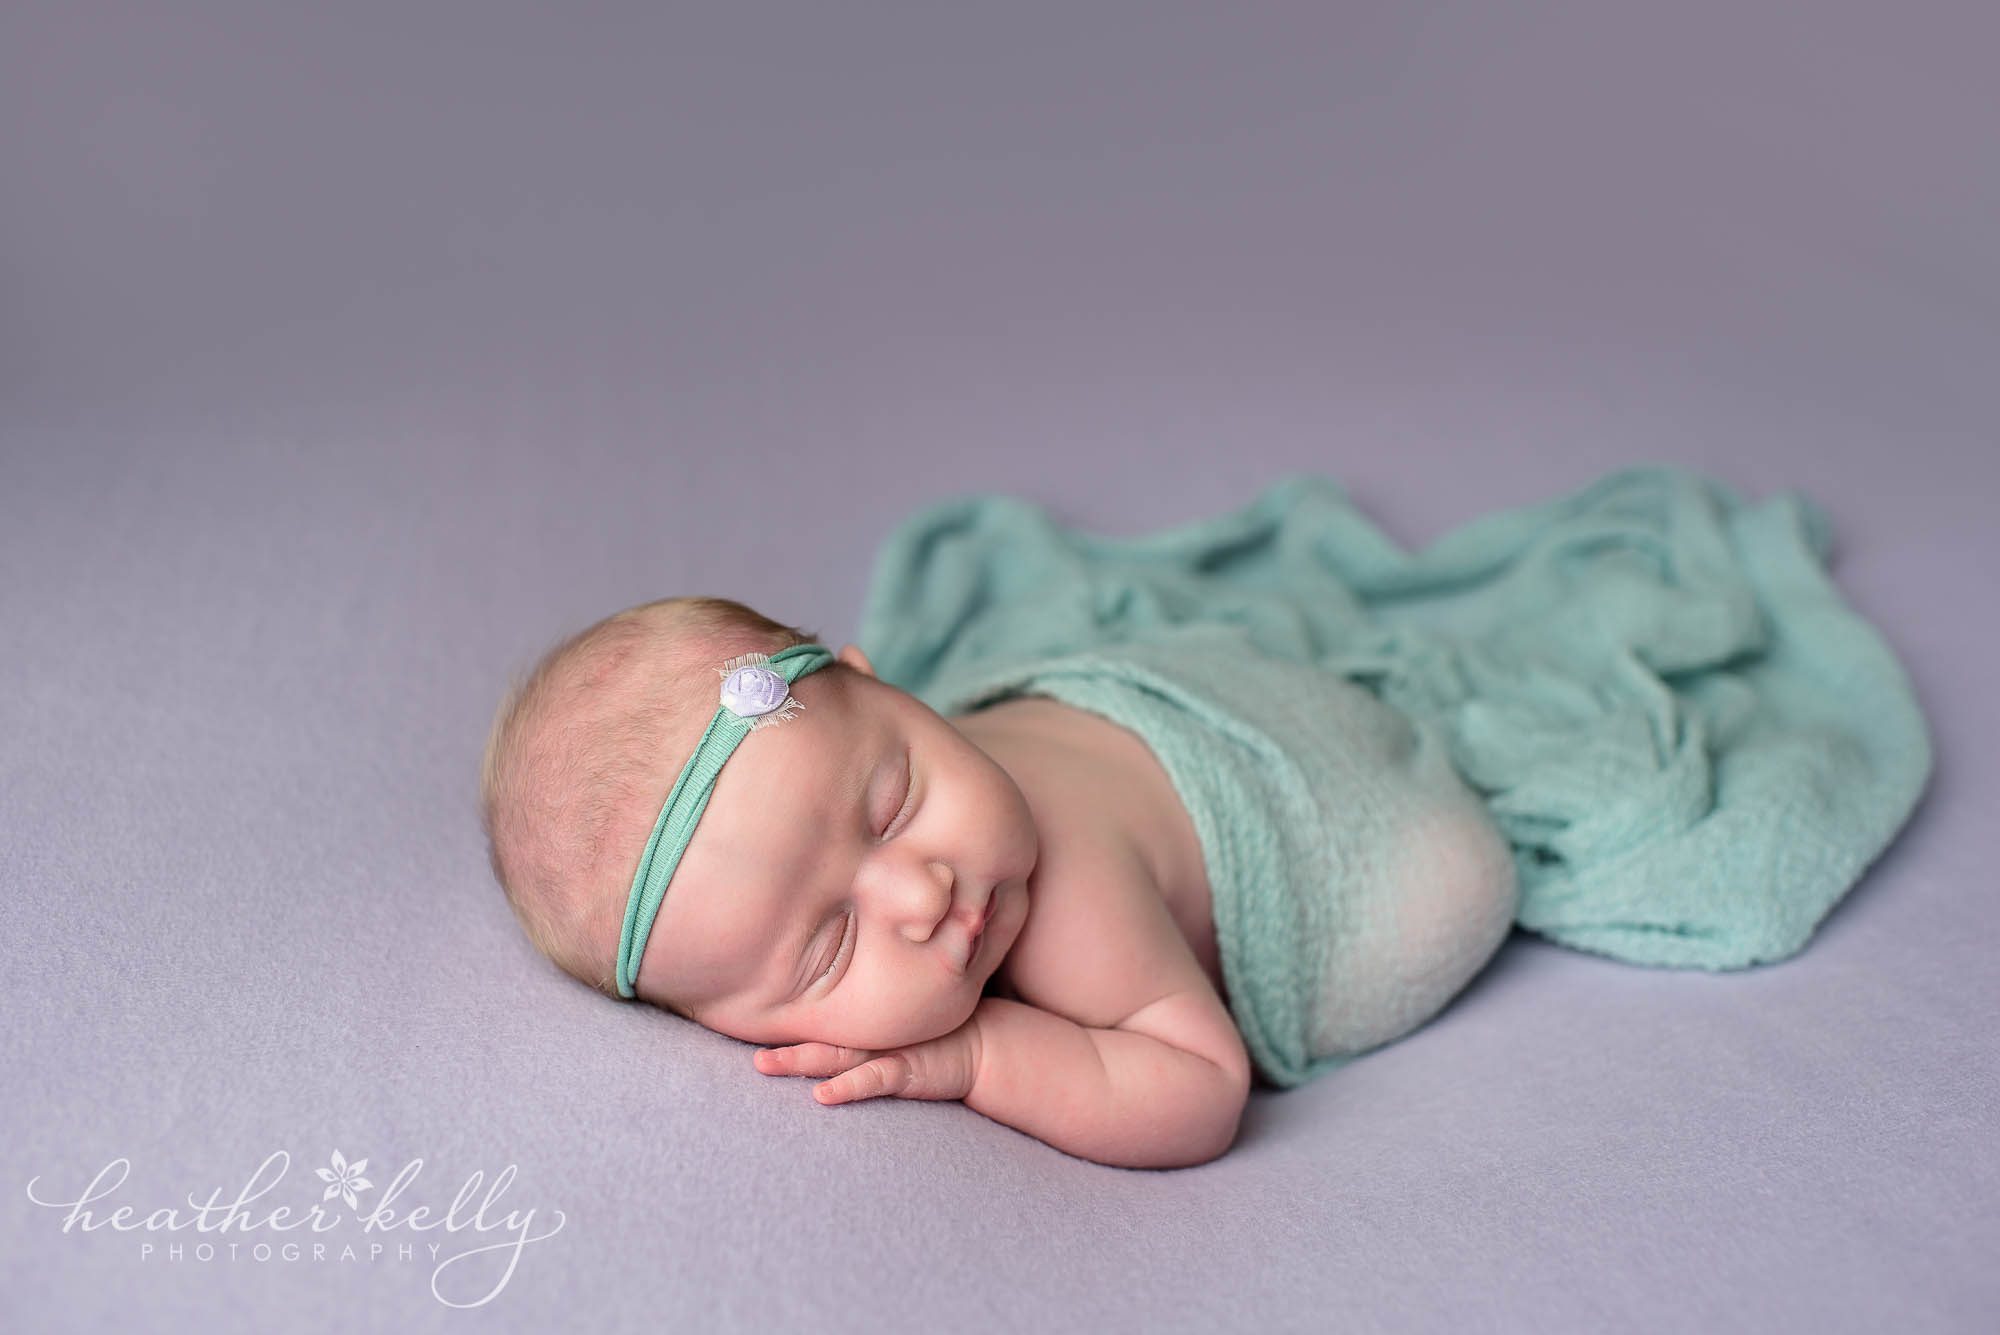 modified taco and wrap. newtown newborn girl. ct photography